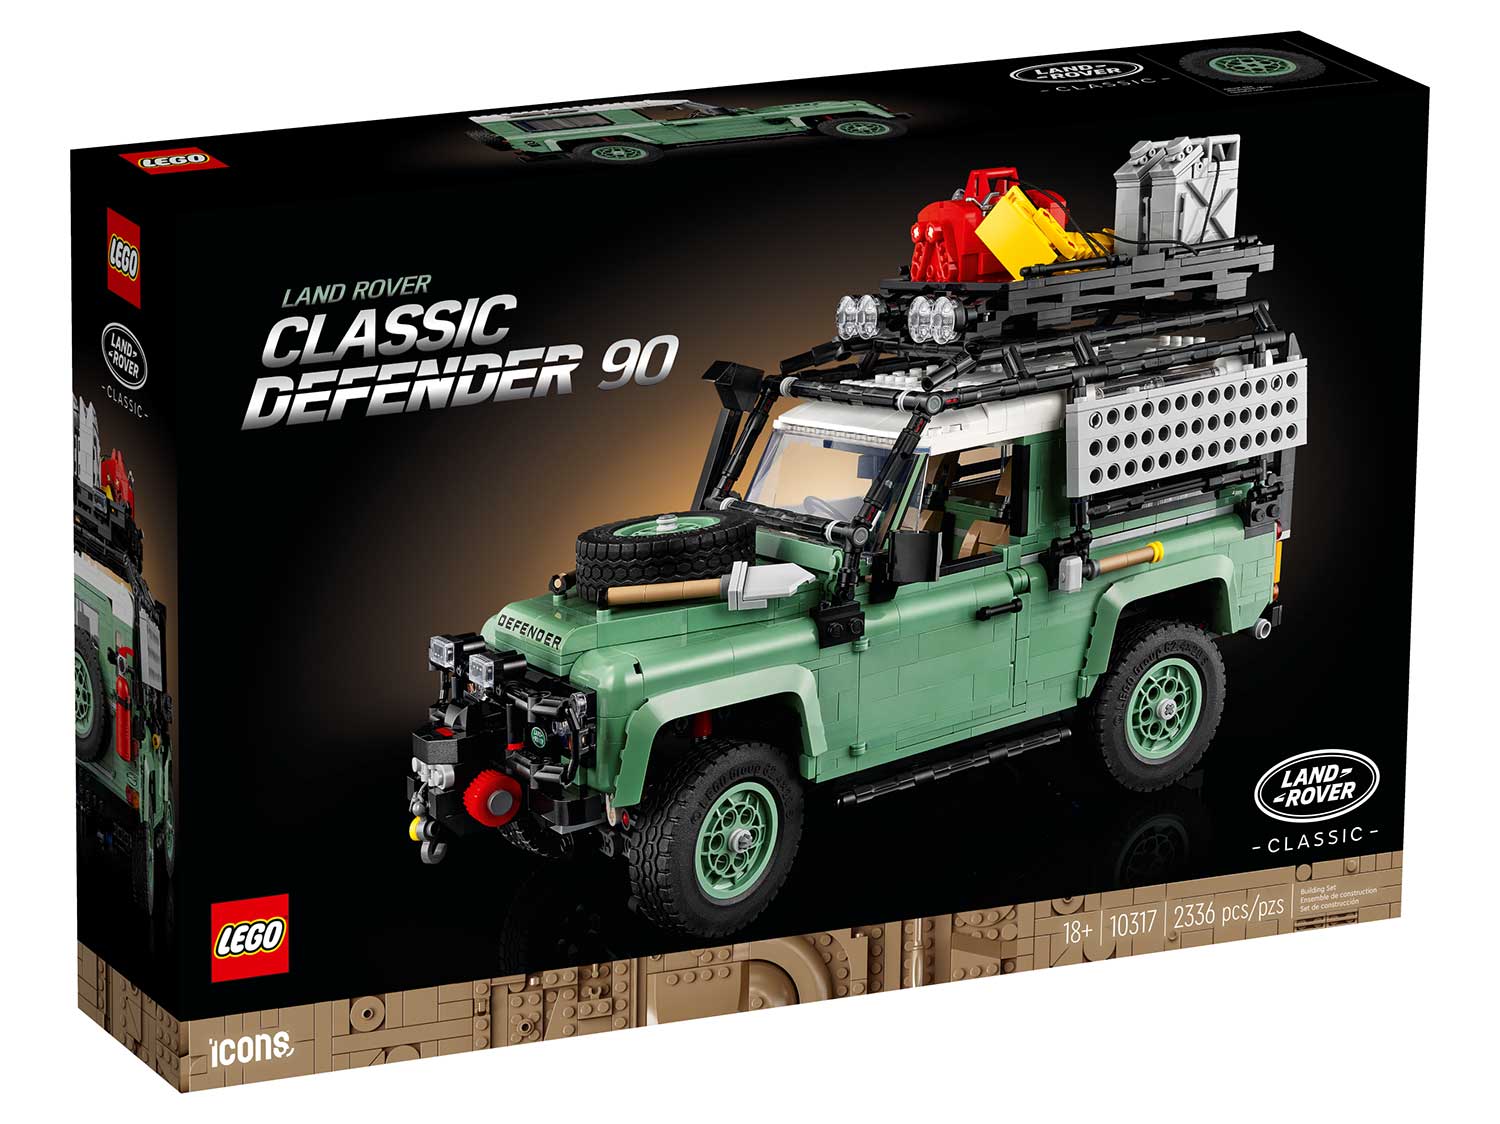 10317 LEGO Icons - Land Rover Classic Defender 90